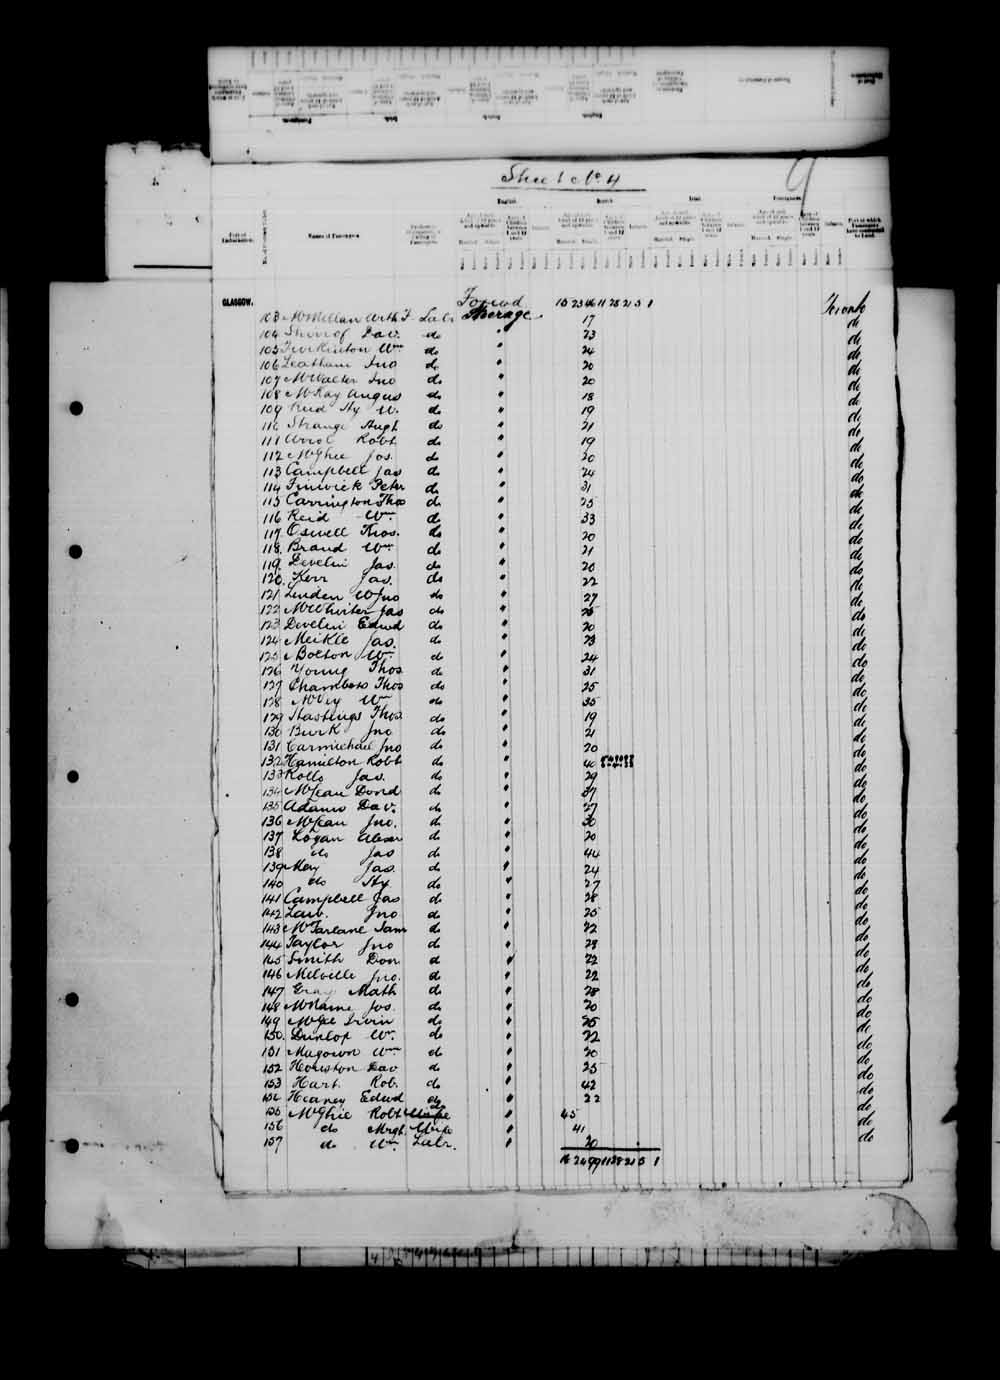 Digitized page of Passenger Lists for Image No.: e003542770